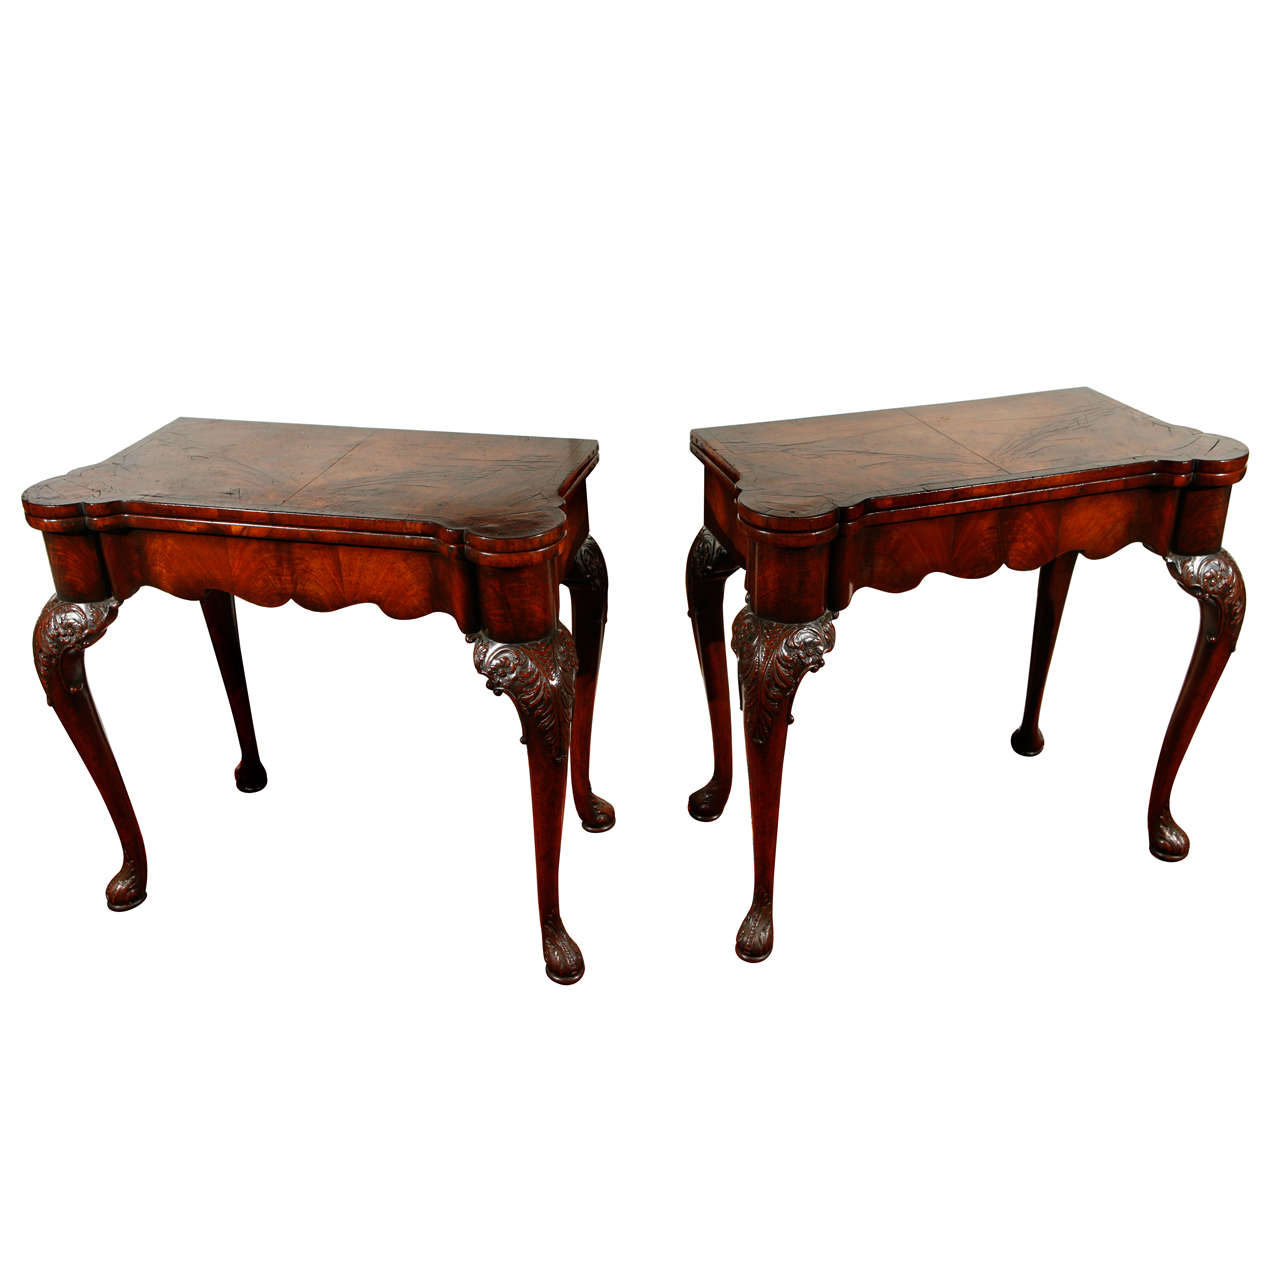 English Games Tables with Needlepoint Interiors